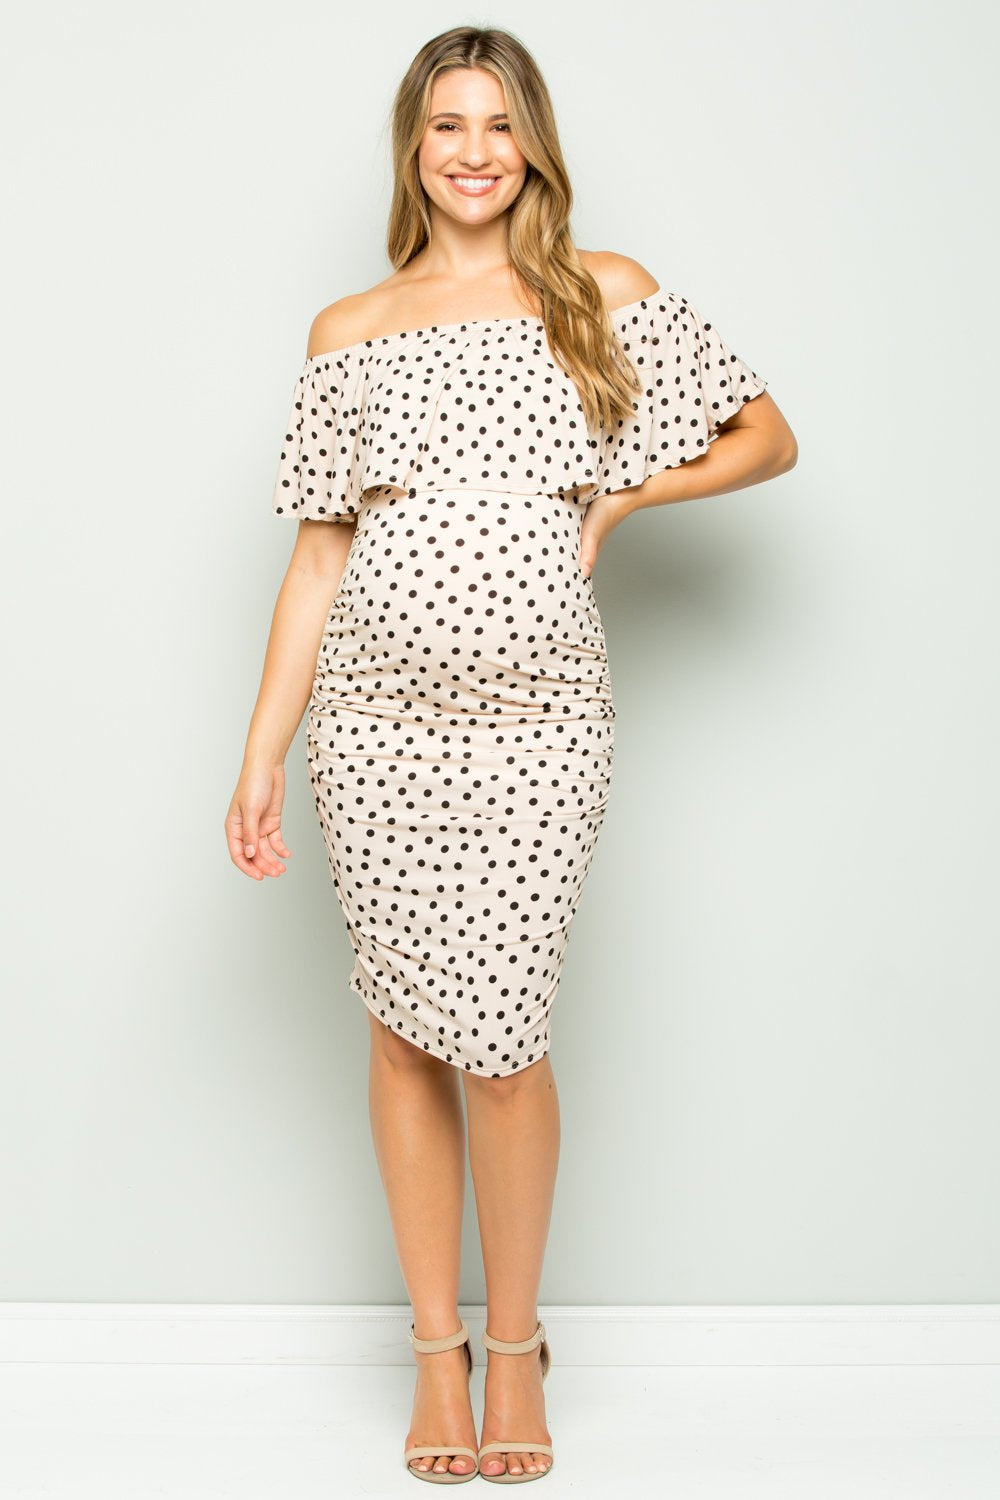 maternity pregnancy baby shower polka dot off shoulder ruffle neck above knee summer cocktail bodycon dress